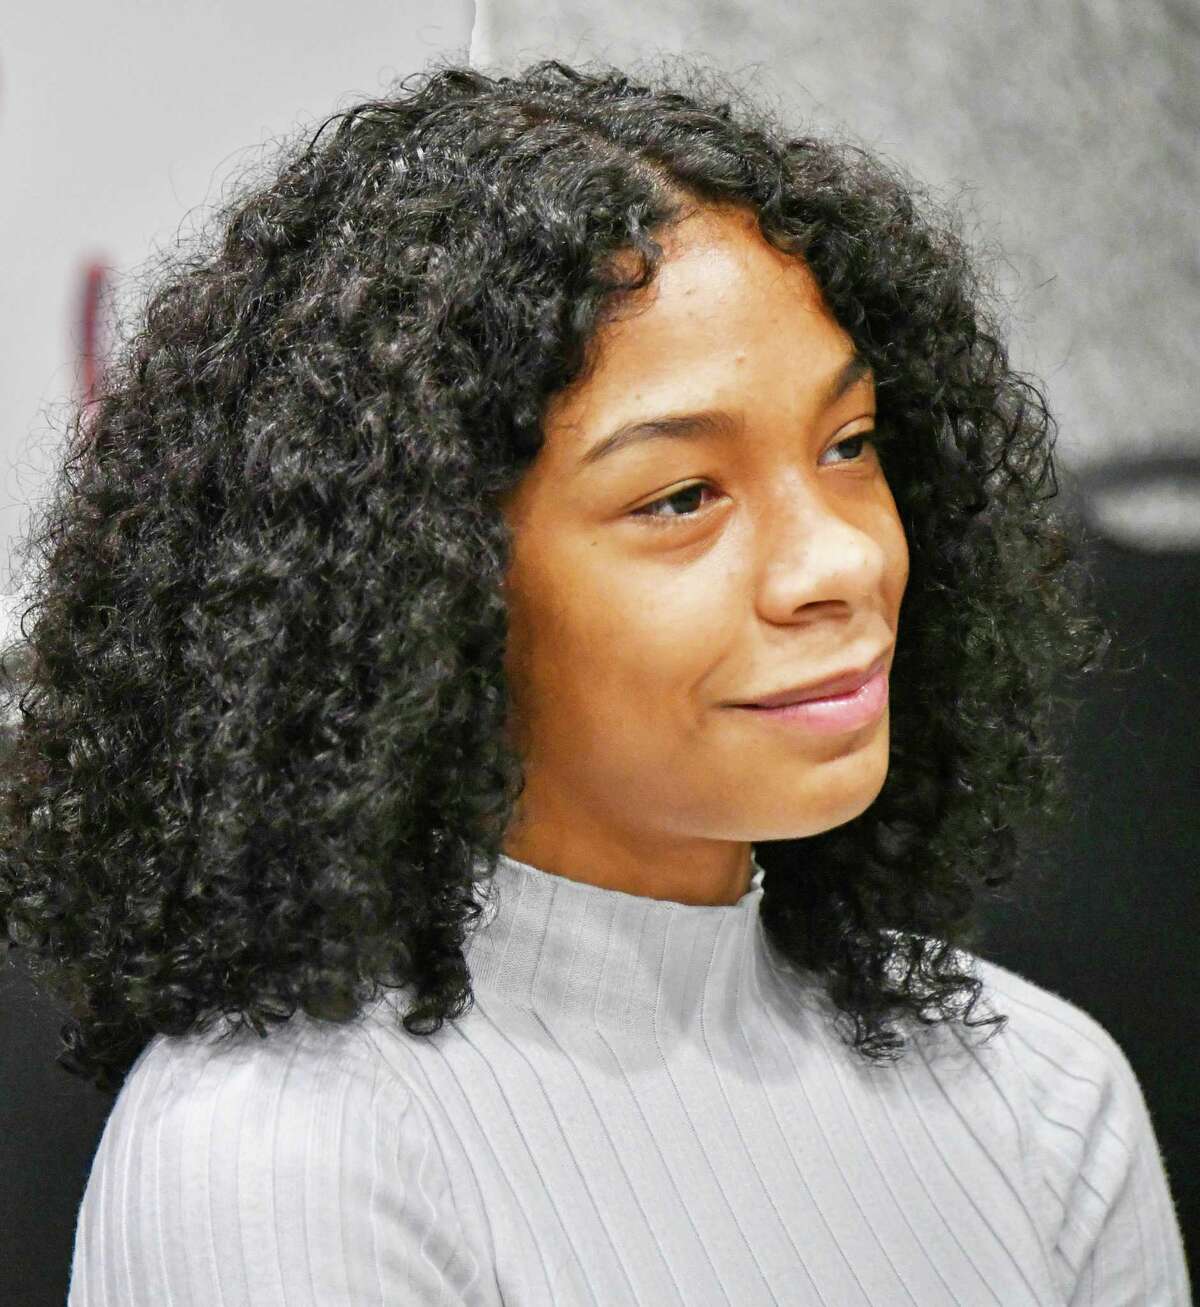 On Monday, the National Organization of Black Law Enforcement Executives, Connecticut Chapter, awarded a $3,000 scholarship to Middletown High School graduate Jenaya Salafia.